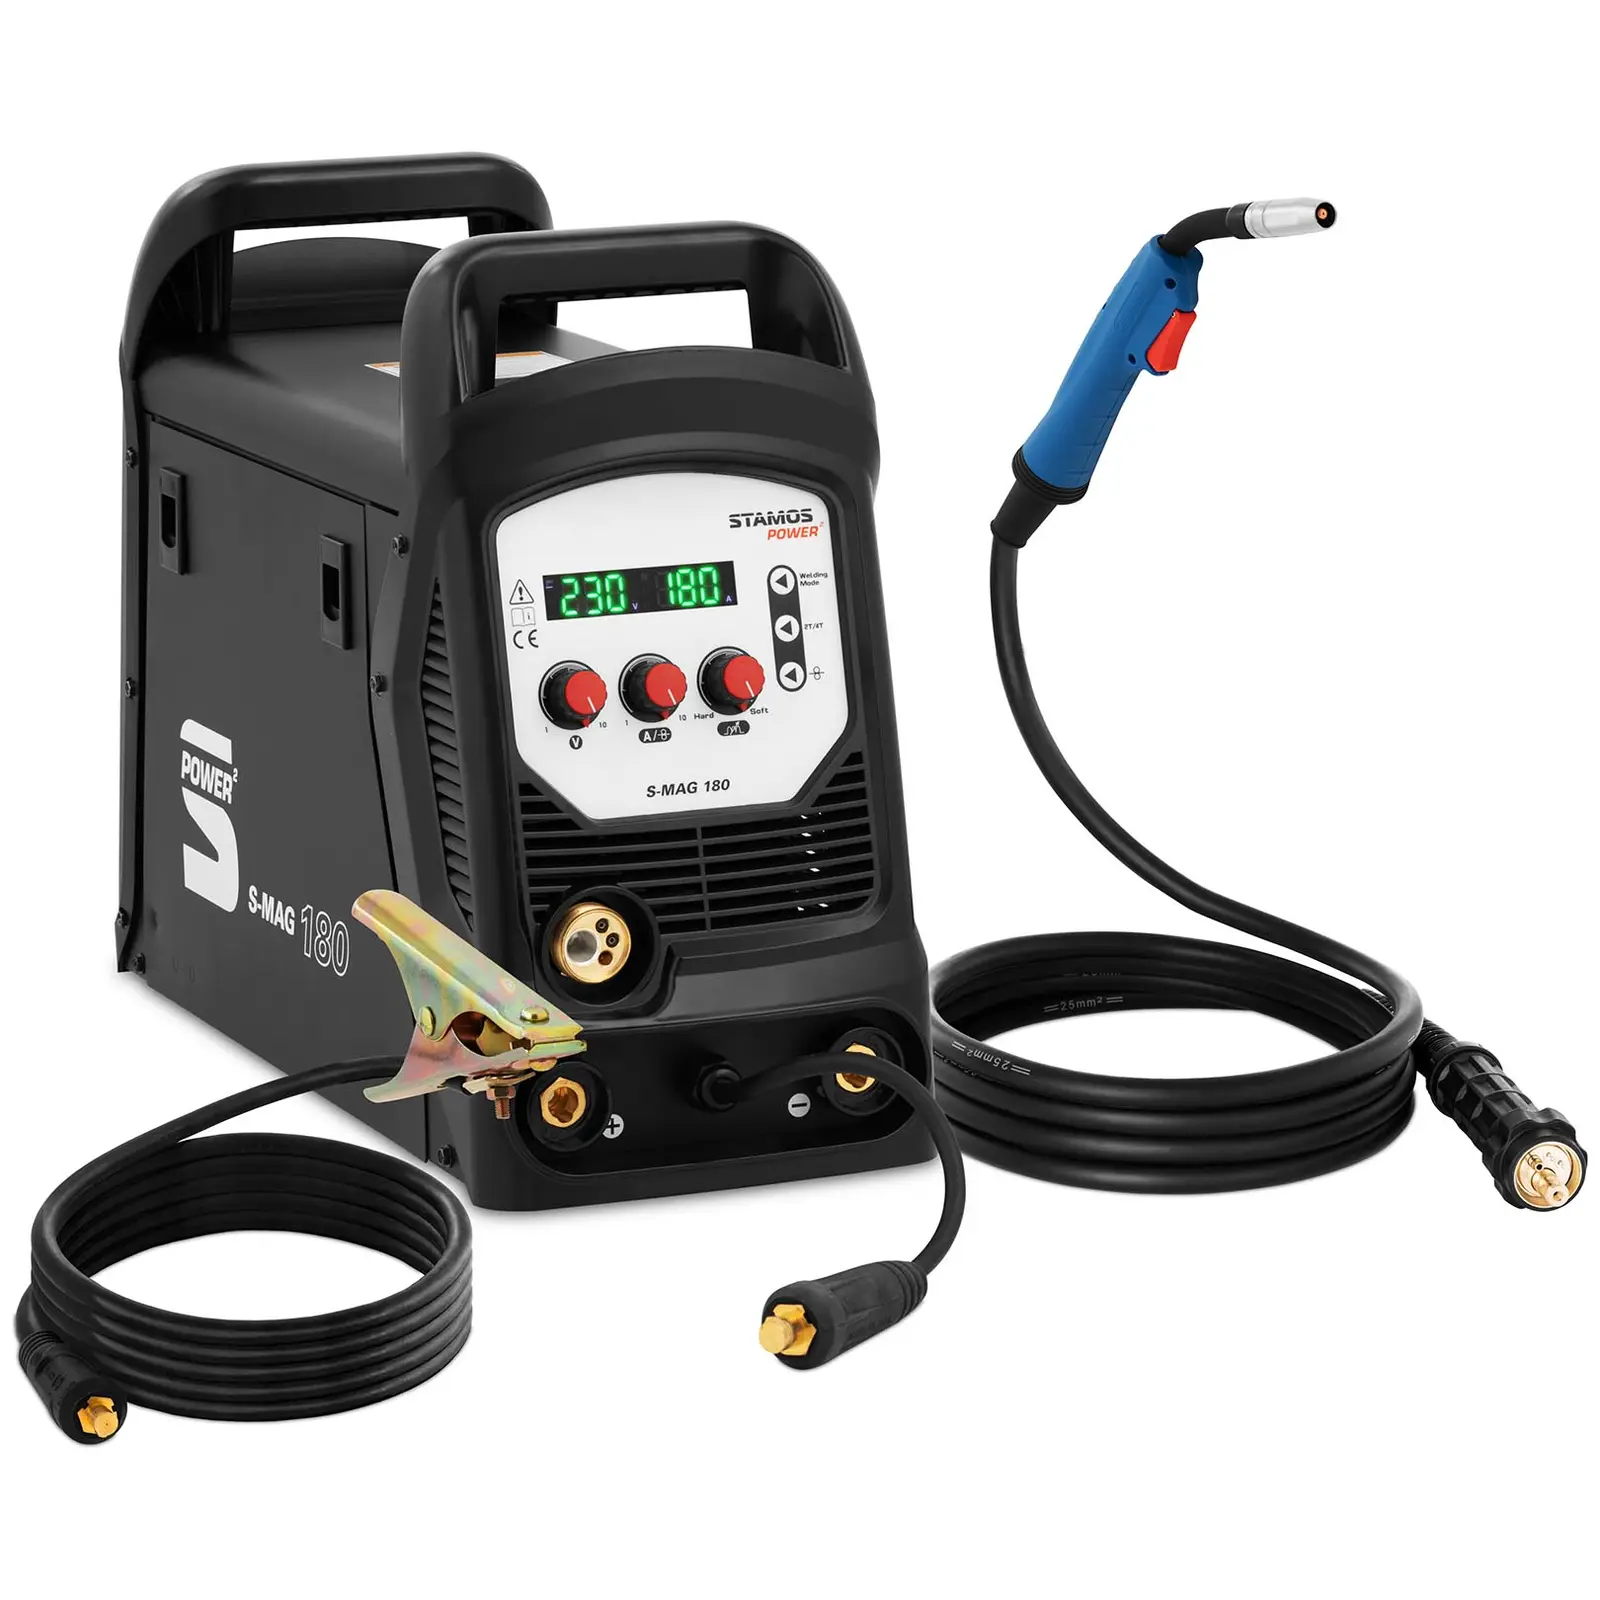 MIG/MAG welding machine - 180 A - 2/4 cycle - 230 V